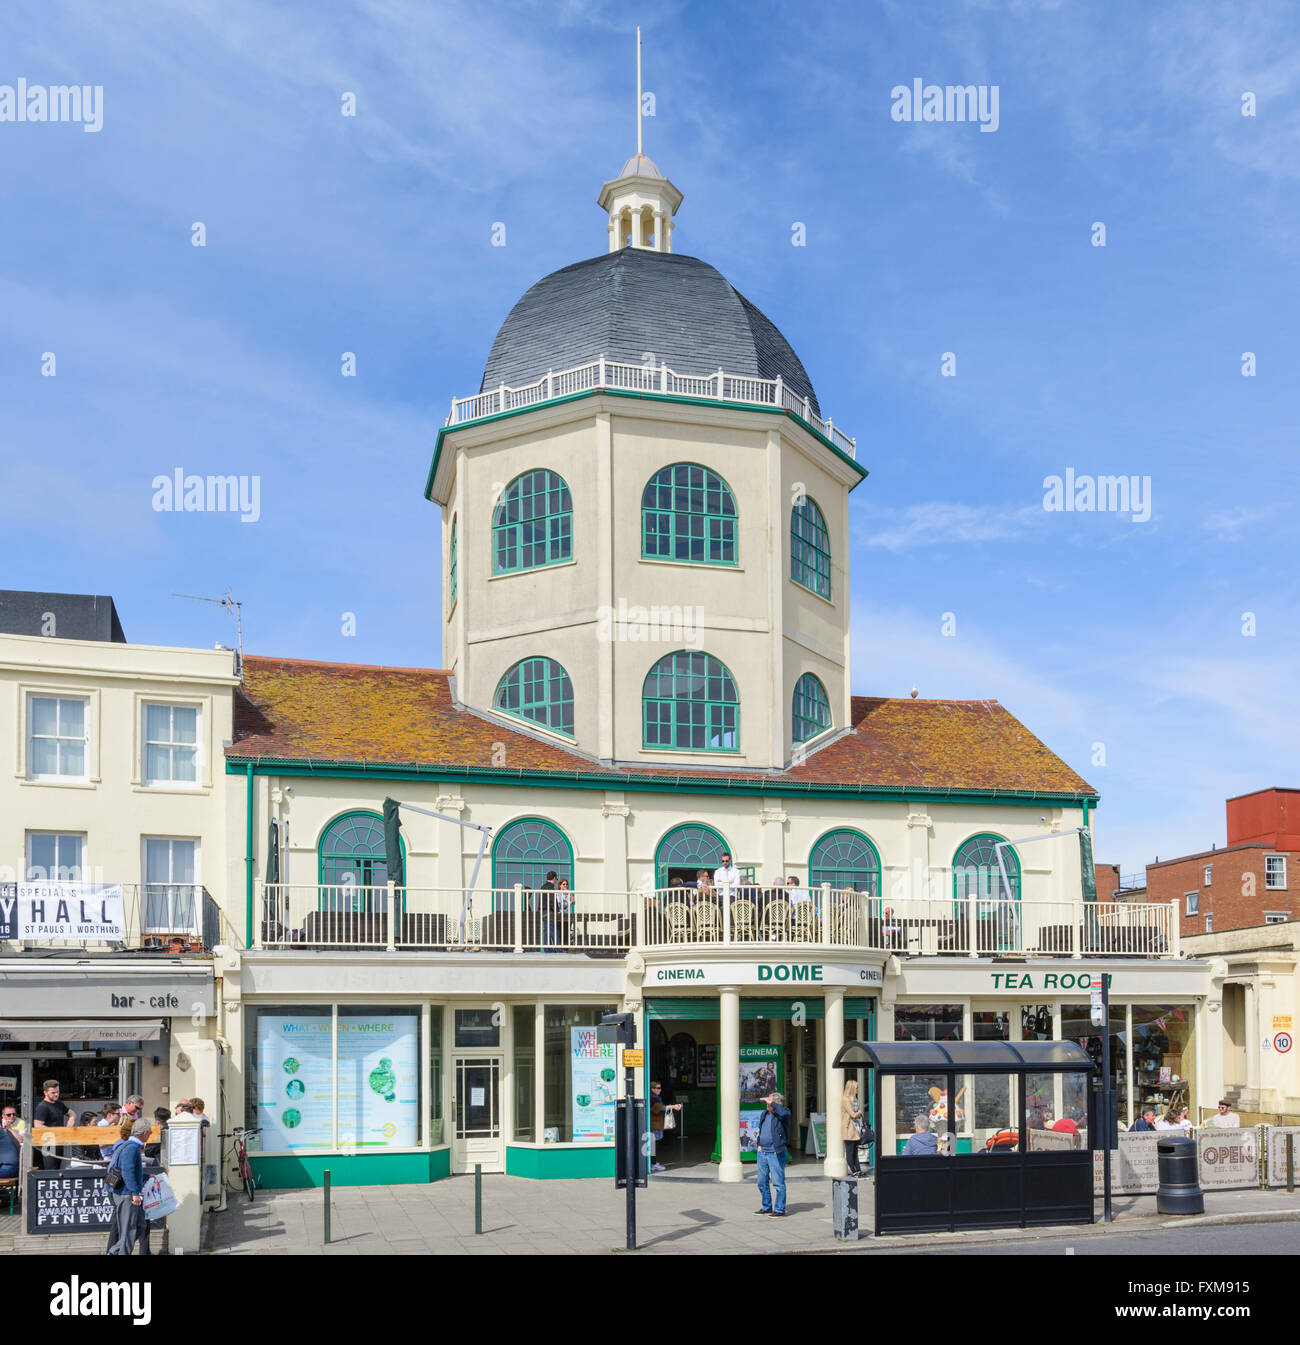 The Dome Cinema grade II listed building at Worthing, West Sussex, England, UK. Stock Photo